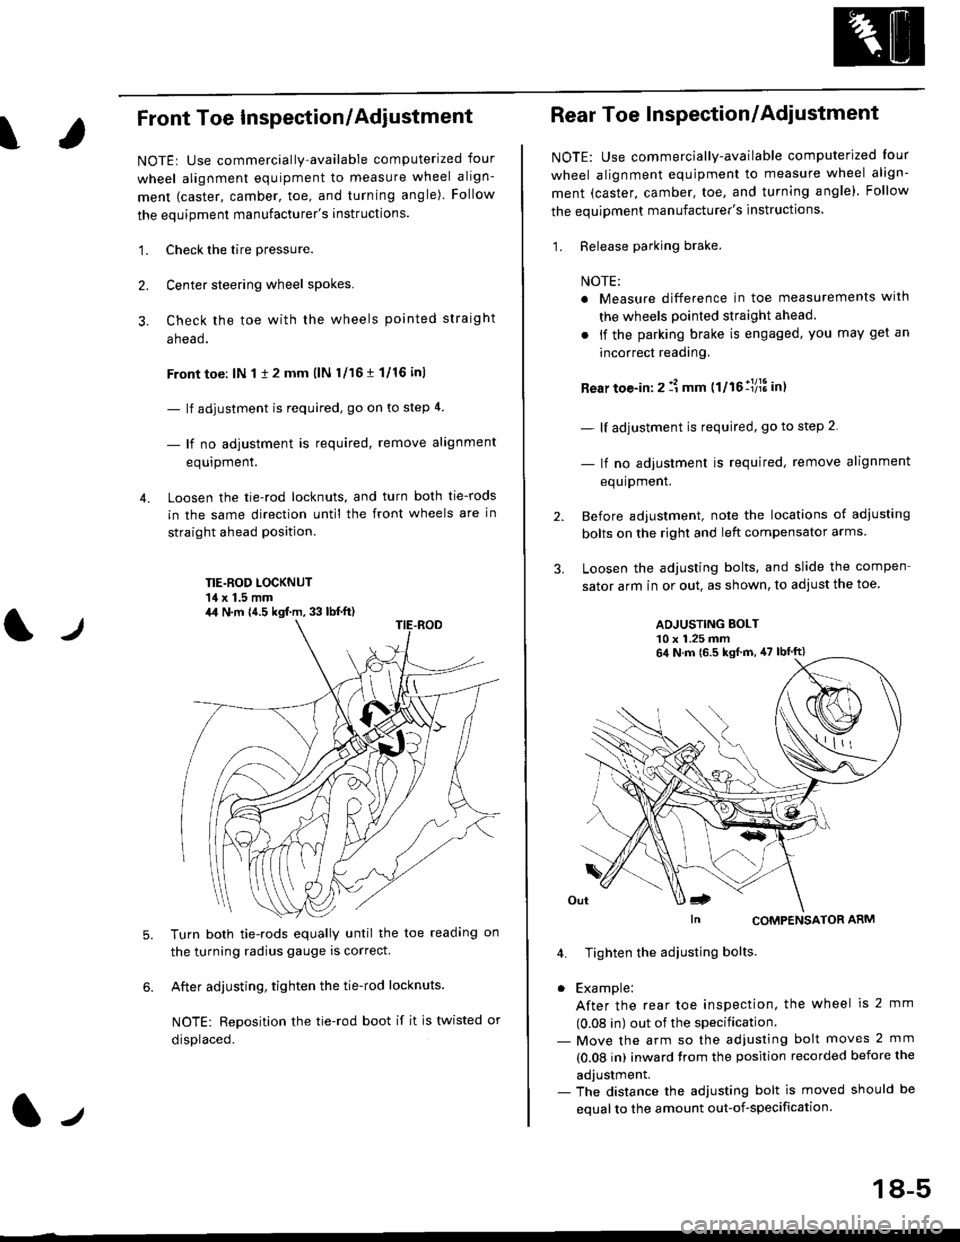 HONDA CIVIC 1996 6.G Workshop Manual ?
Front Toe Inspection/Adiustment
NOTE: Use commercially-available computerized four
wheel alignment equipment to measure wheel align-
ment (caster, camber, toe, and turning angle). Follow
the equipme